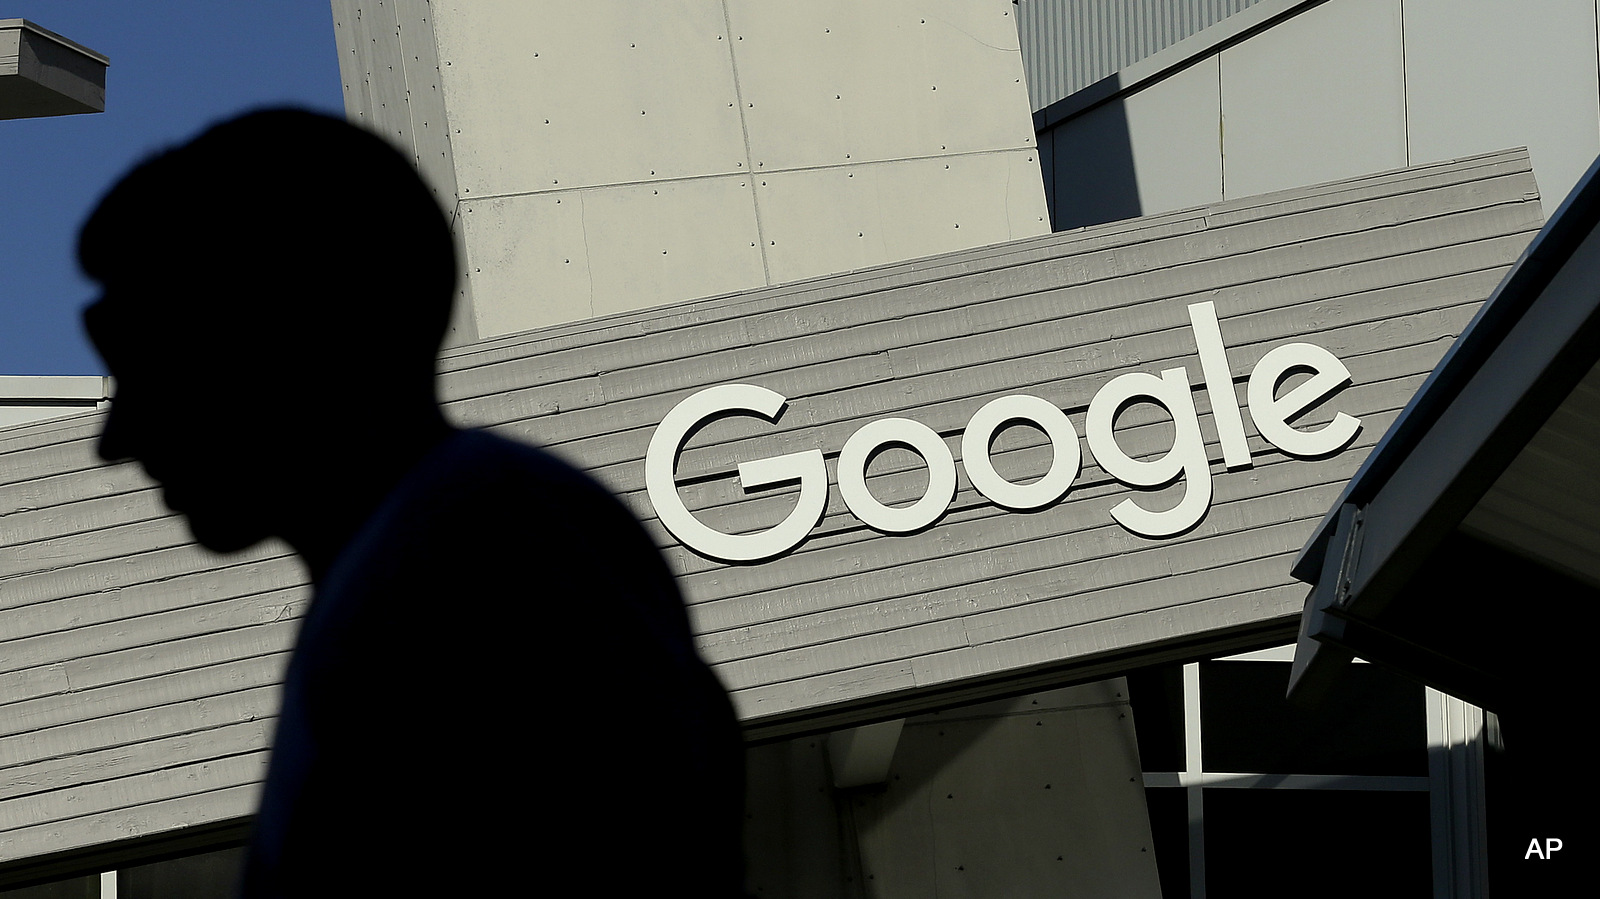 A man walks past a building on the Google campus in Mountain View, Calif. Google recently noted ‘Usage of our services have increased every year, and so have the user data request number.’